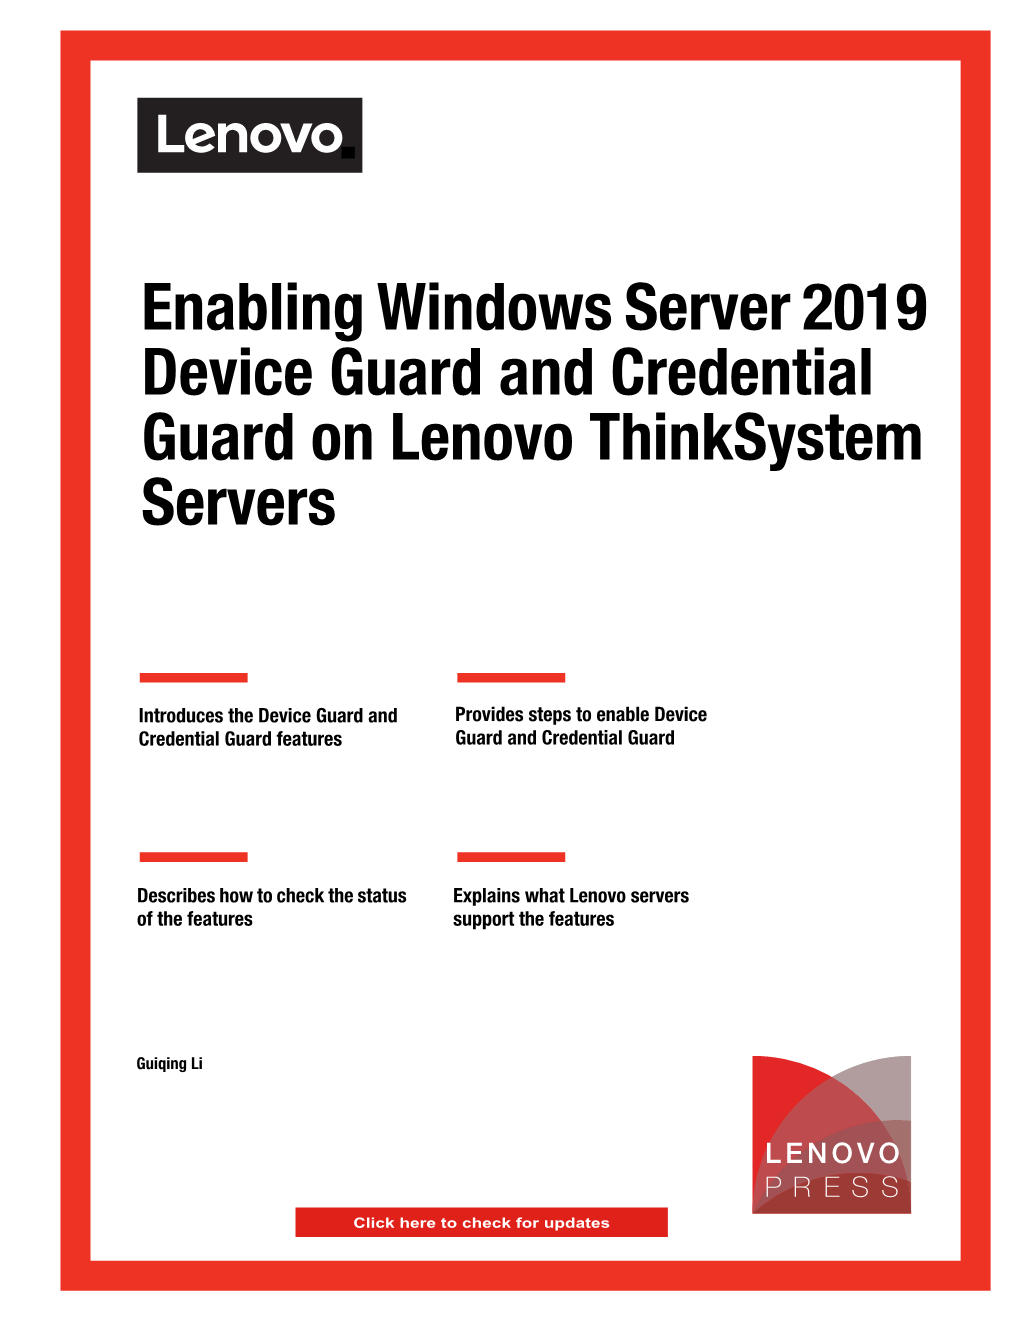 Enabling Windows Server 2019 Device Guard and Credential Guard on Lenovo Thinksystem Servers